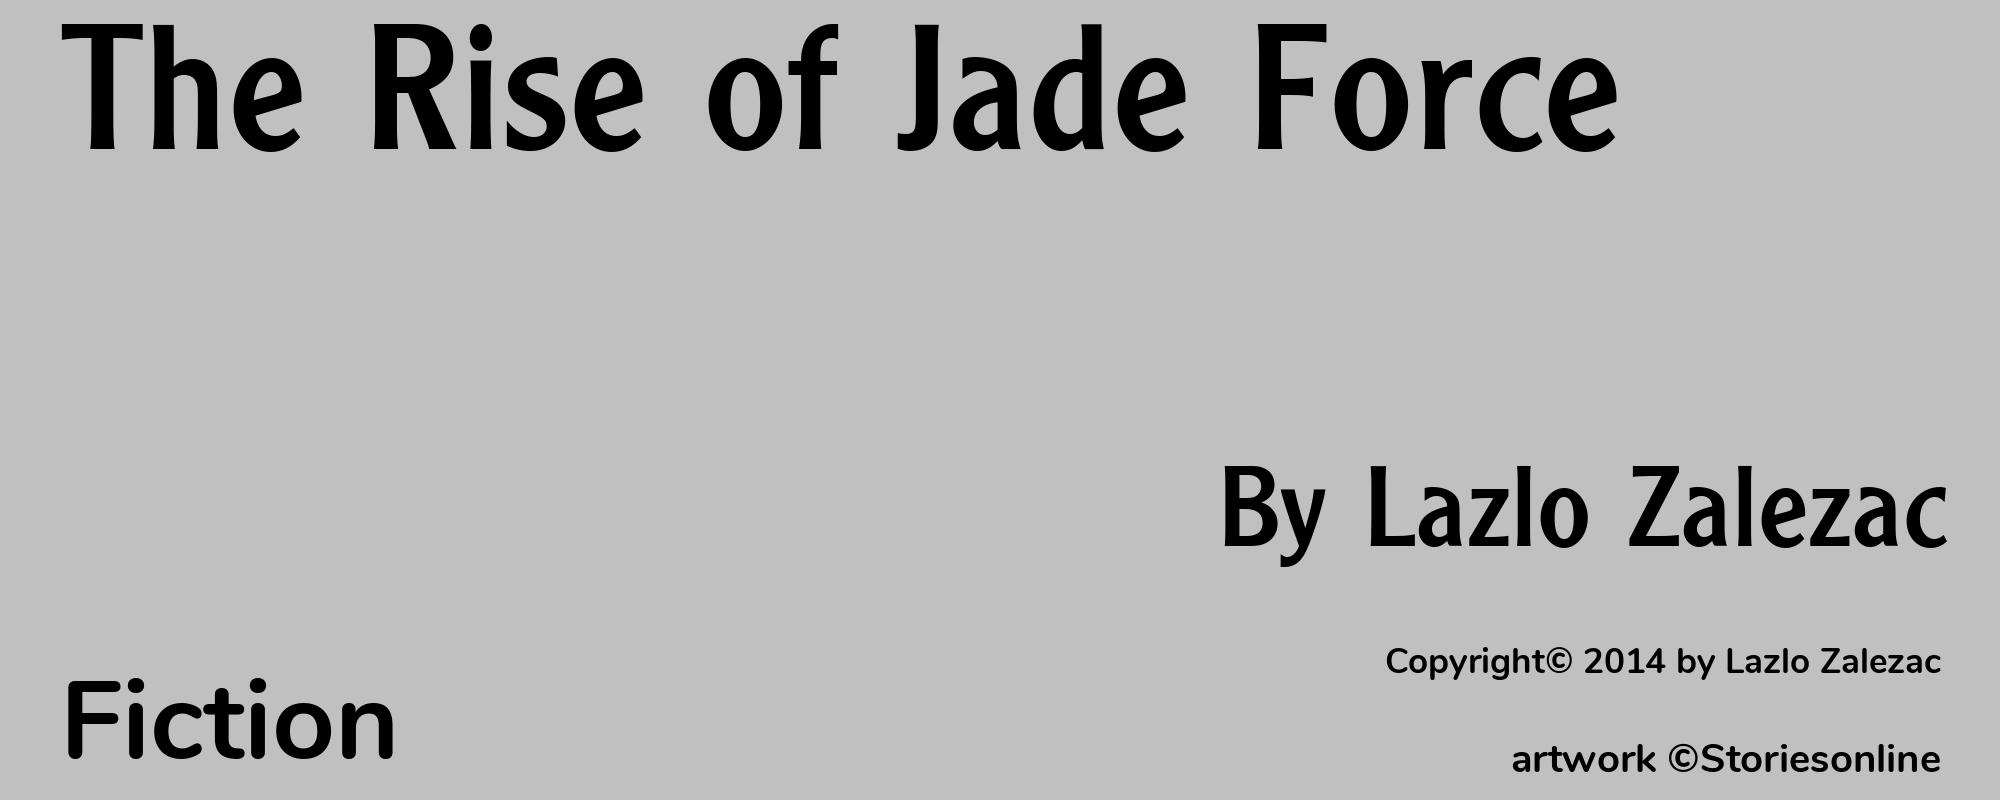 The Rise of Jade Force - Cover